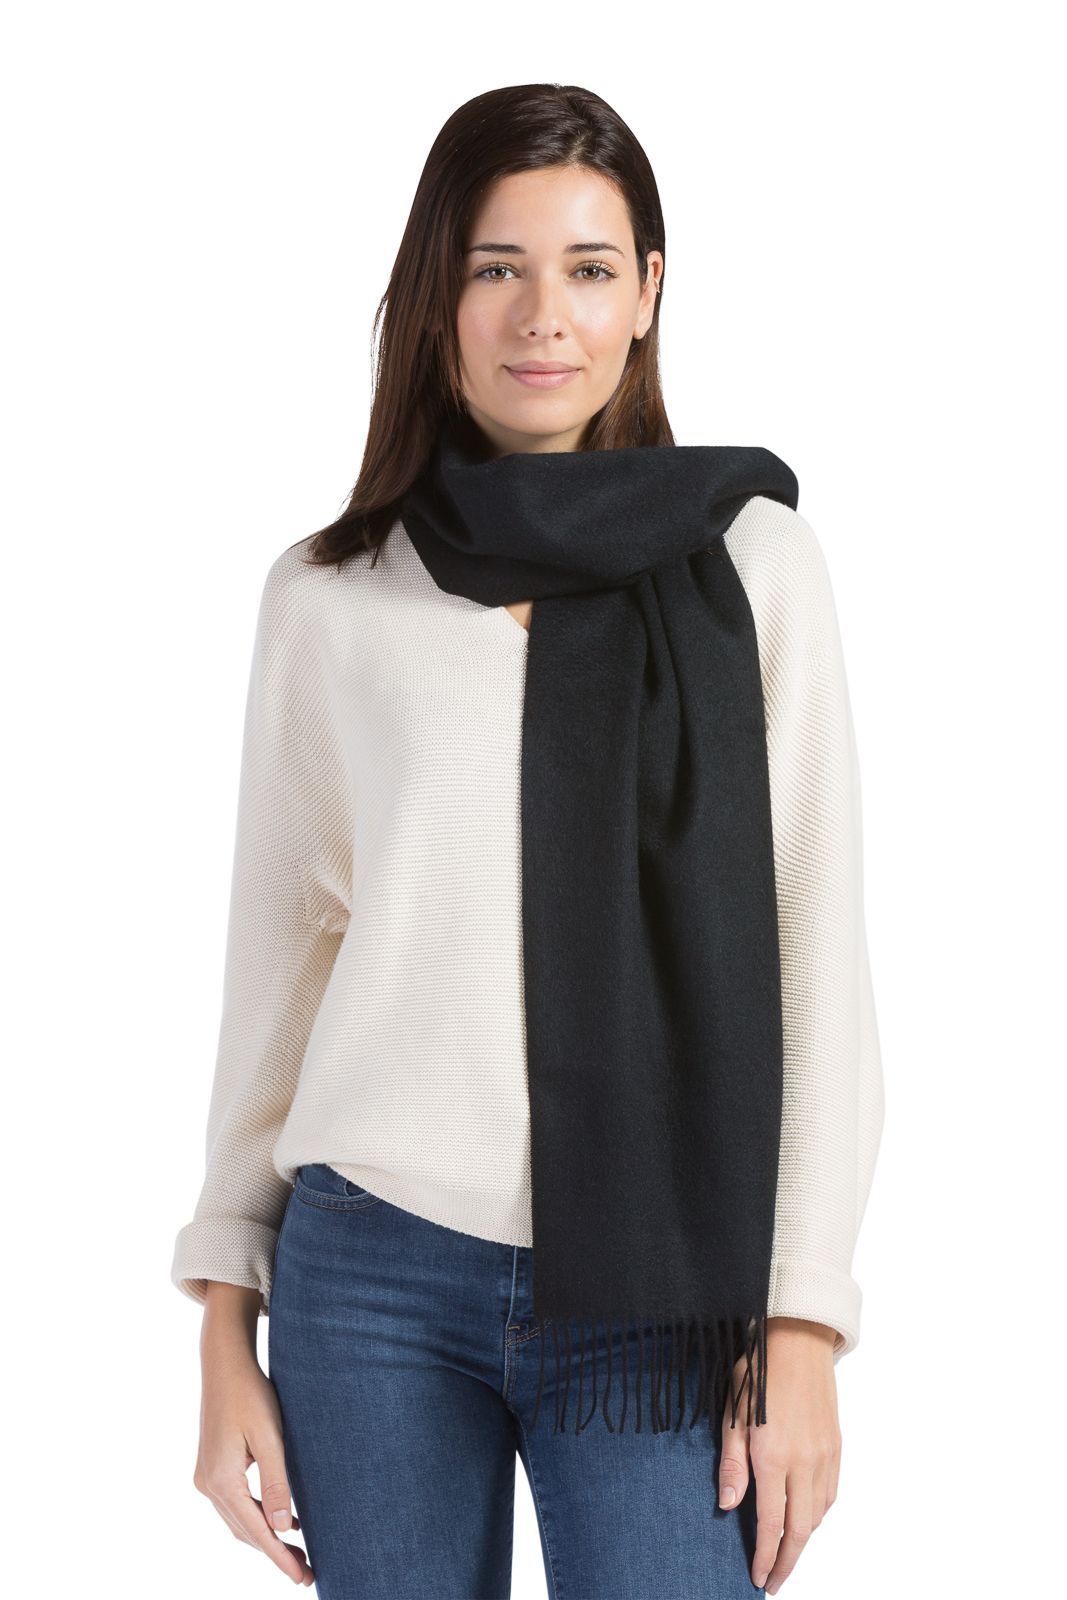 Women's Classic 100% Pure Cashmere Scarf Womens>Accessories>Scarf Fishers Finery Black One Size 